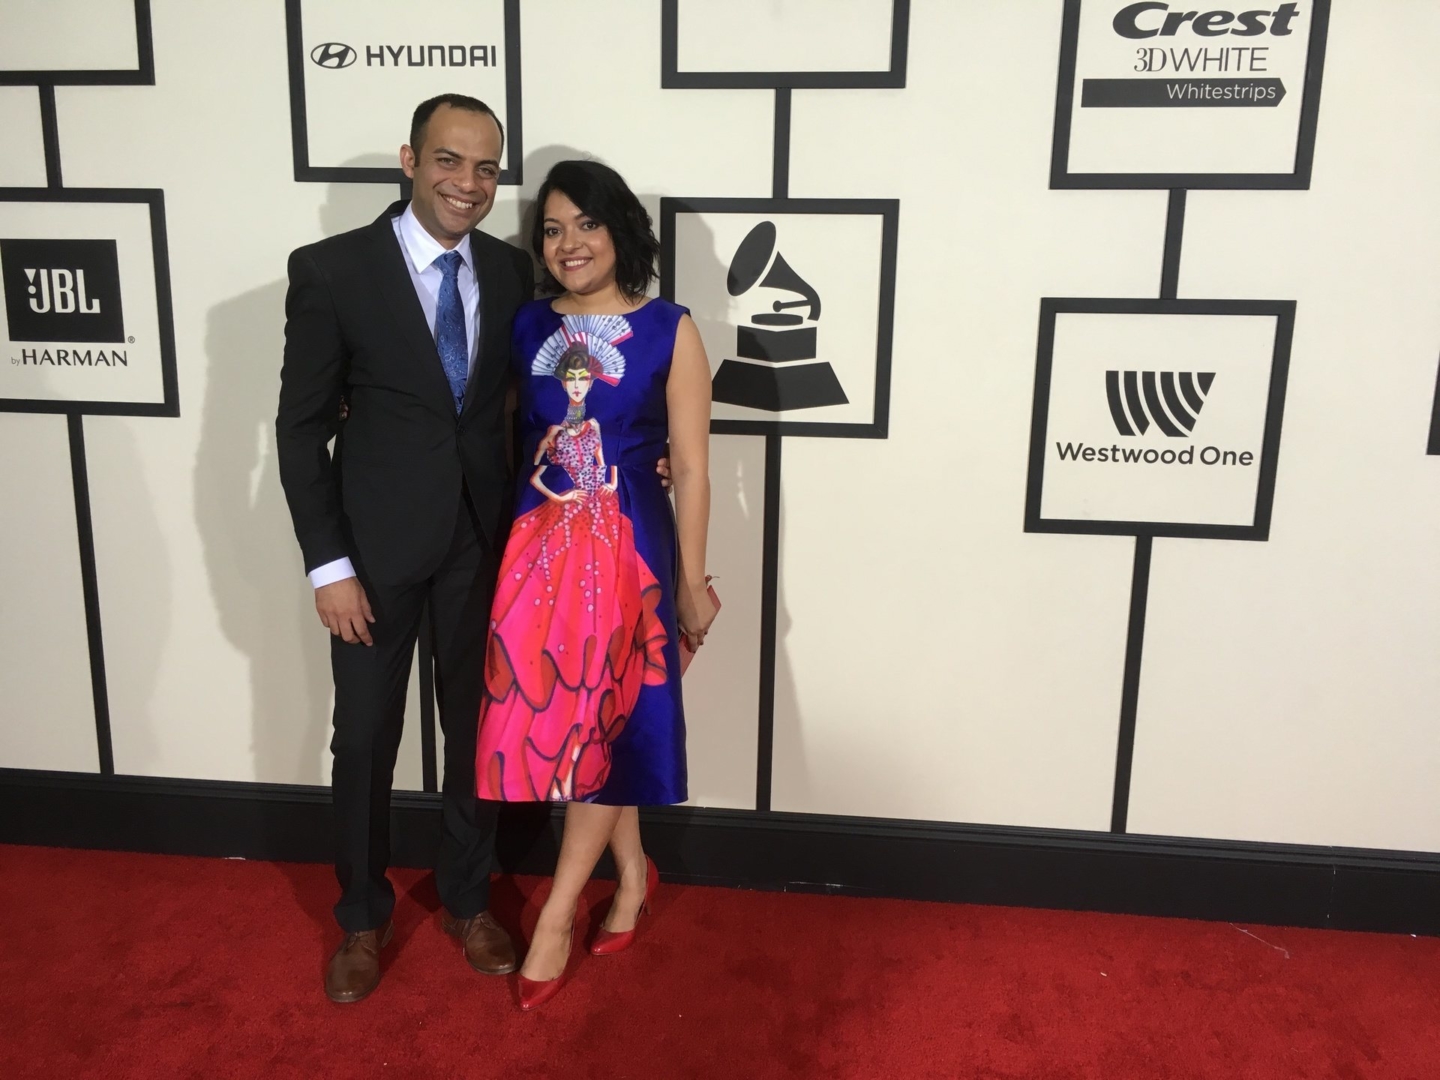 Arun Shenoy and Roshni Mohapatra attend the 58th Annual GRAMMY Awards at STAPLES Center on February 15, 2016 in Los Angeles, California.